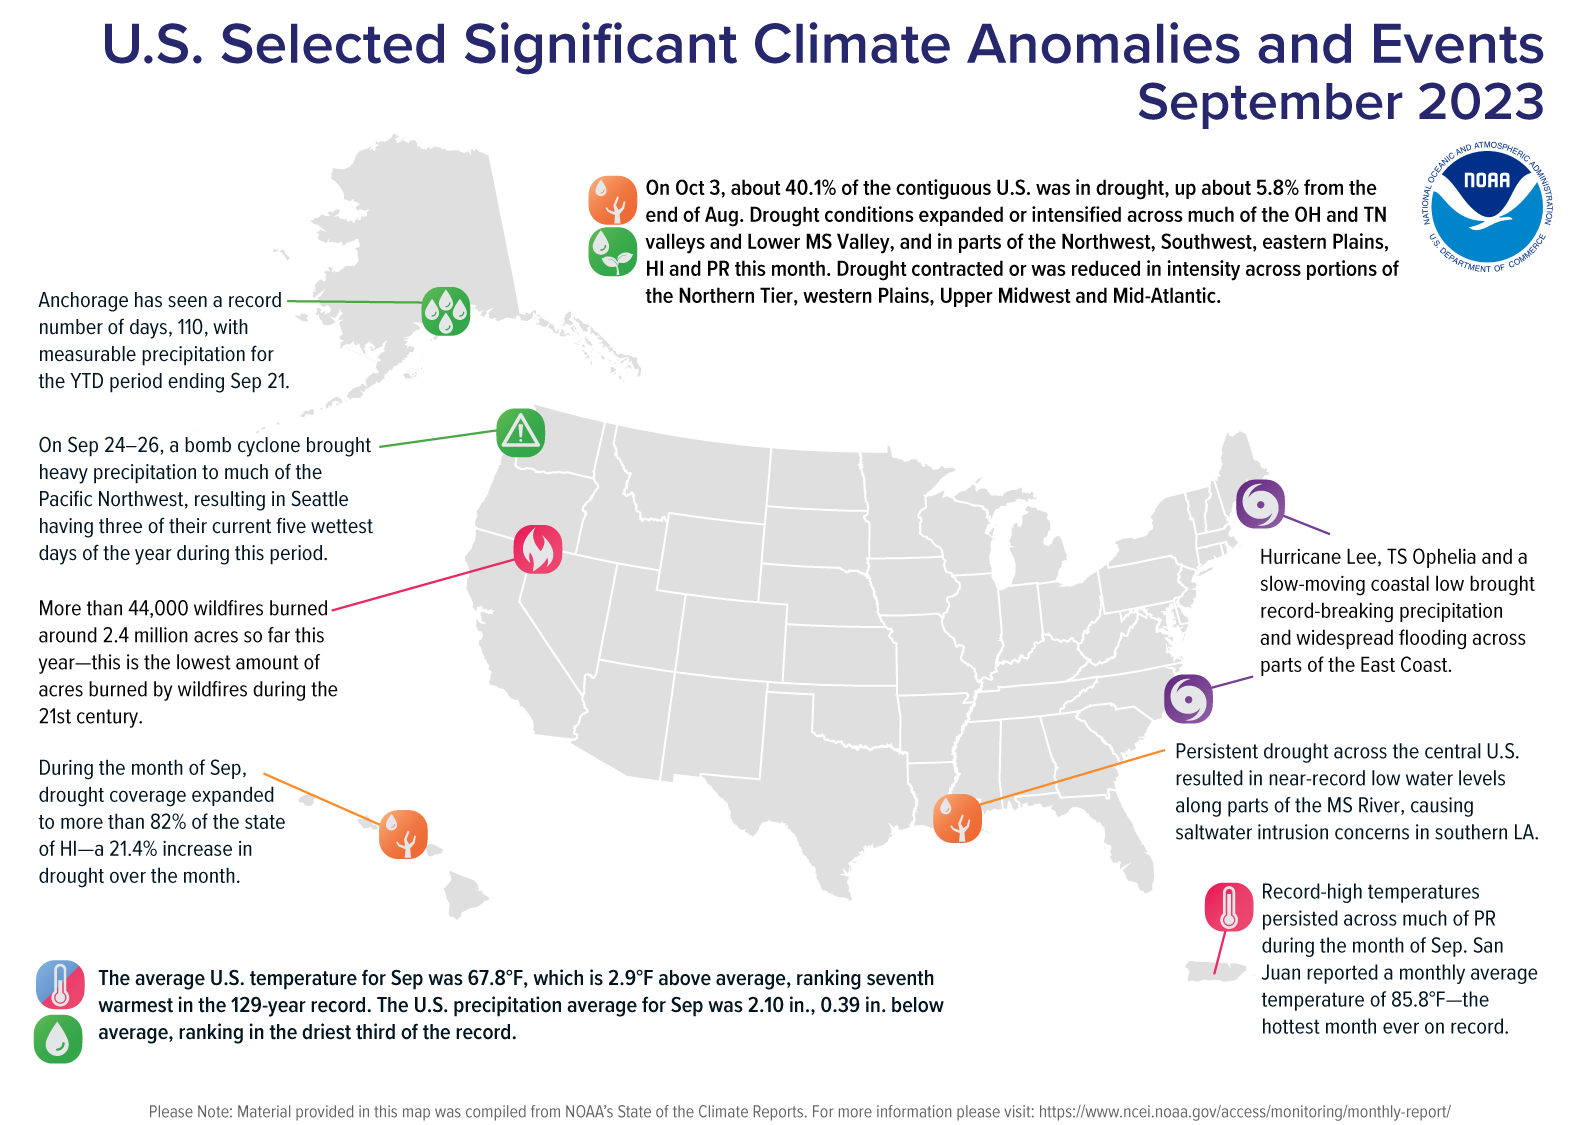 A map of the U.S. plotted with significant climate events that occurred during September 2023. Please see the story below as well as more details in the report summary from NOAA NCEI at http://bit.ly/USClimate202309.